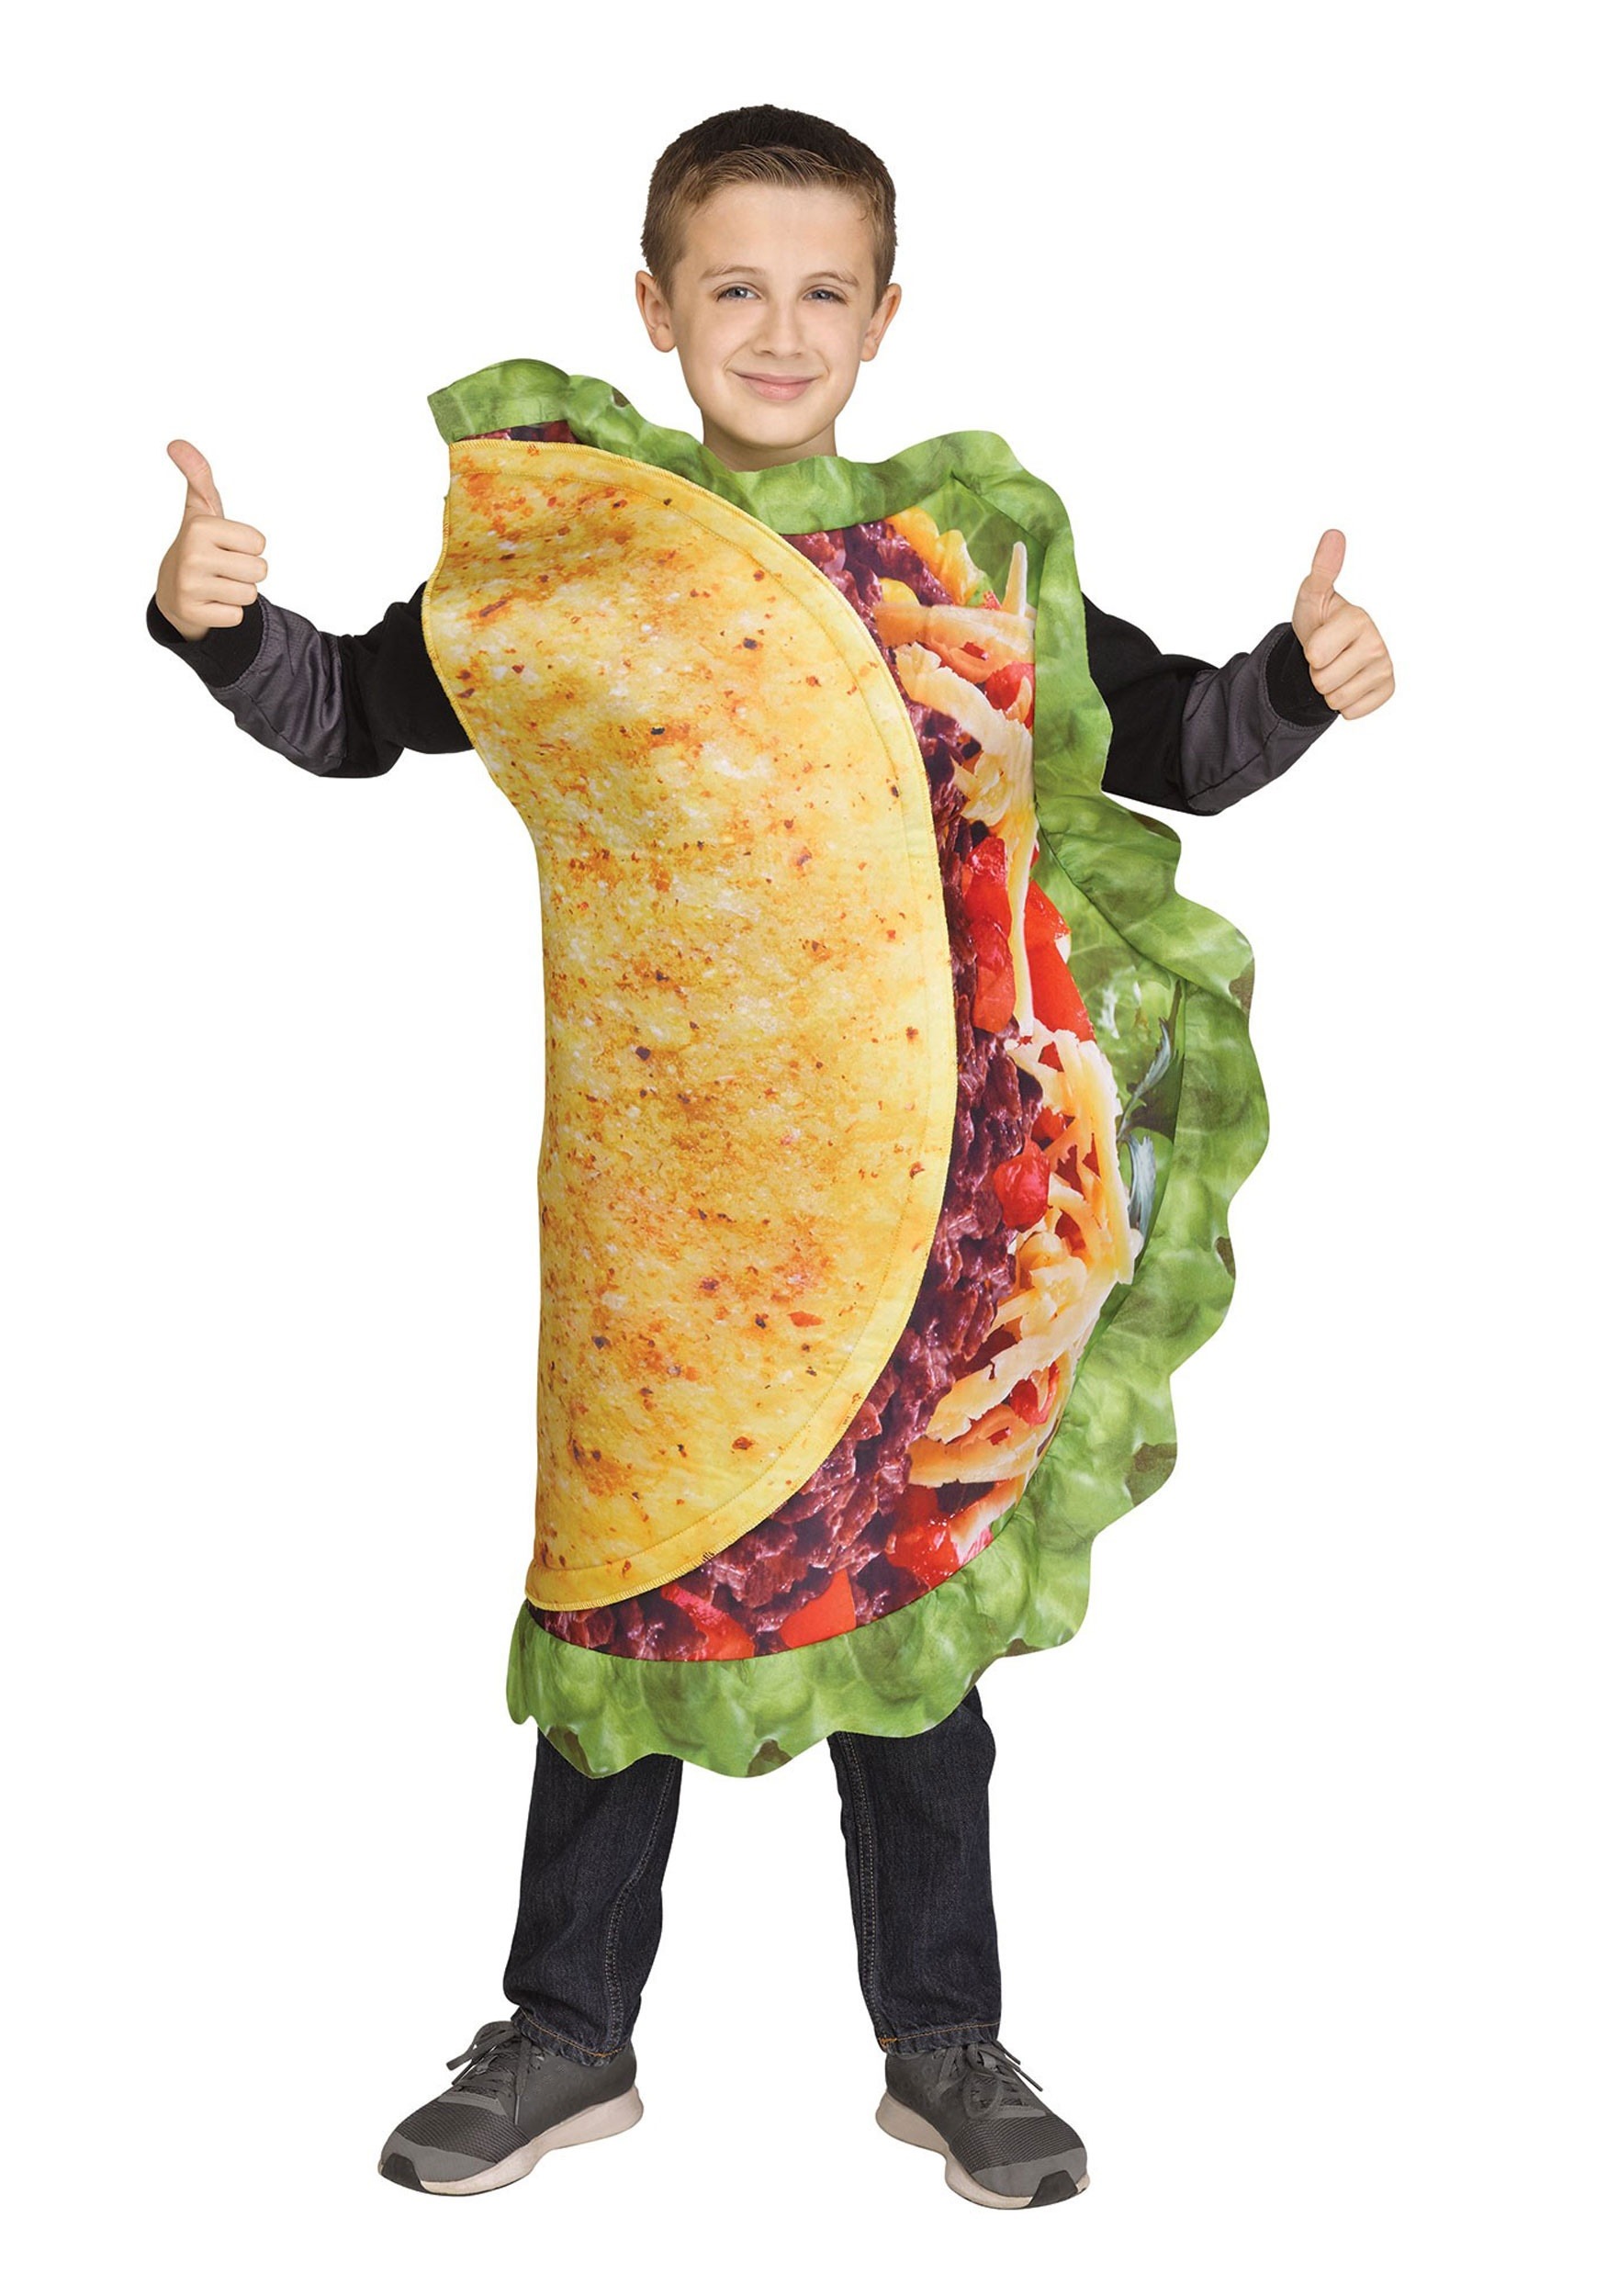 Realistic Taco Costume for Kids. 